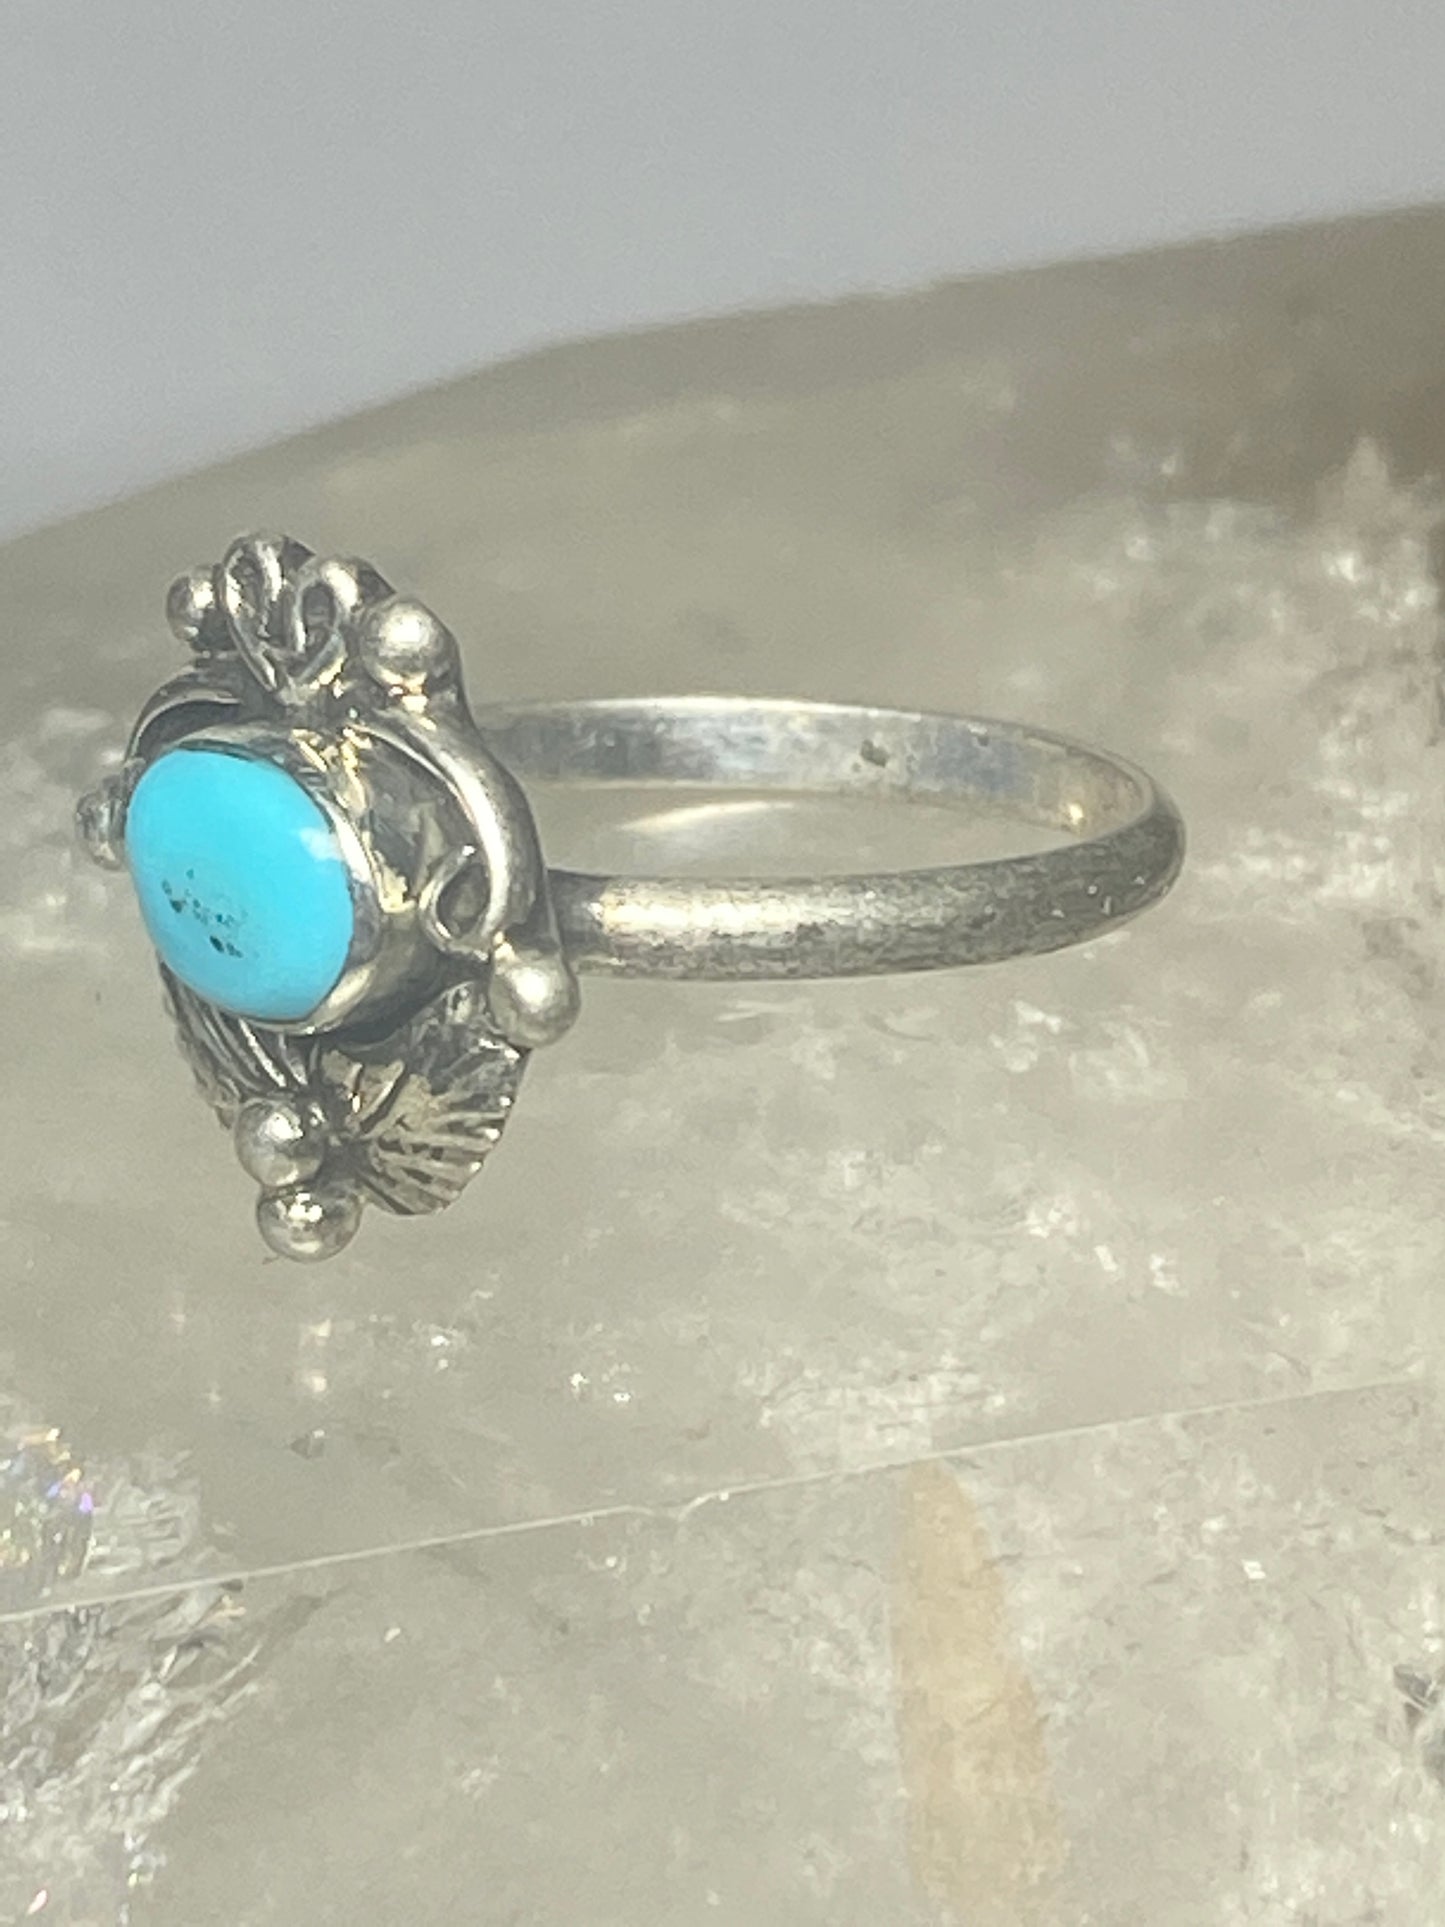 Turquoise ring leaves band southwest sterling silver women girls m